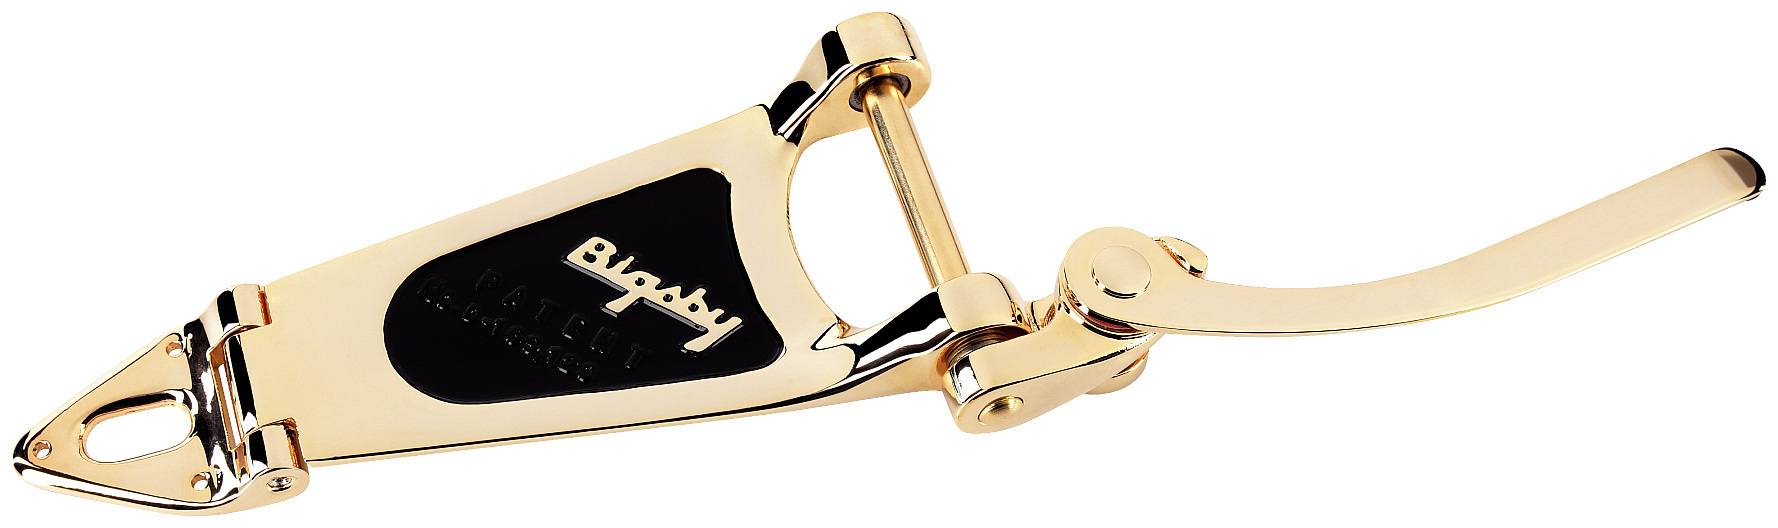 Bigsby B6 Vibrato - Large Hollow-Body Guitars - Gold